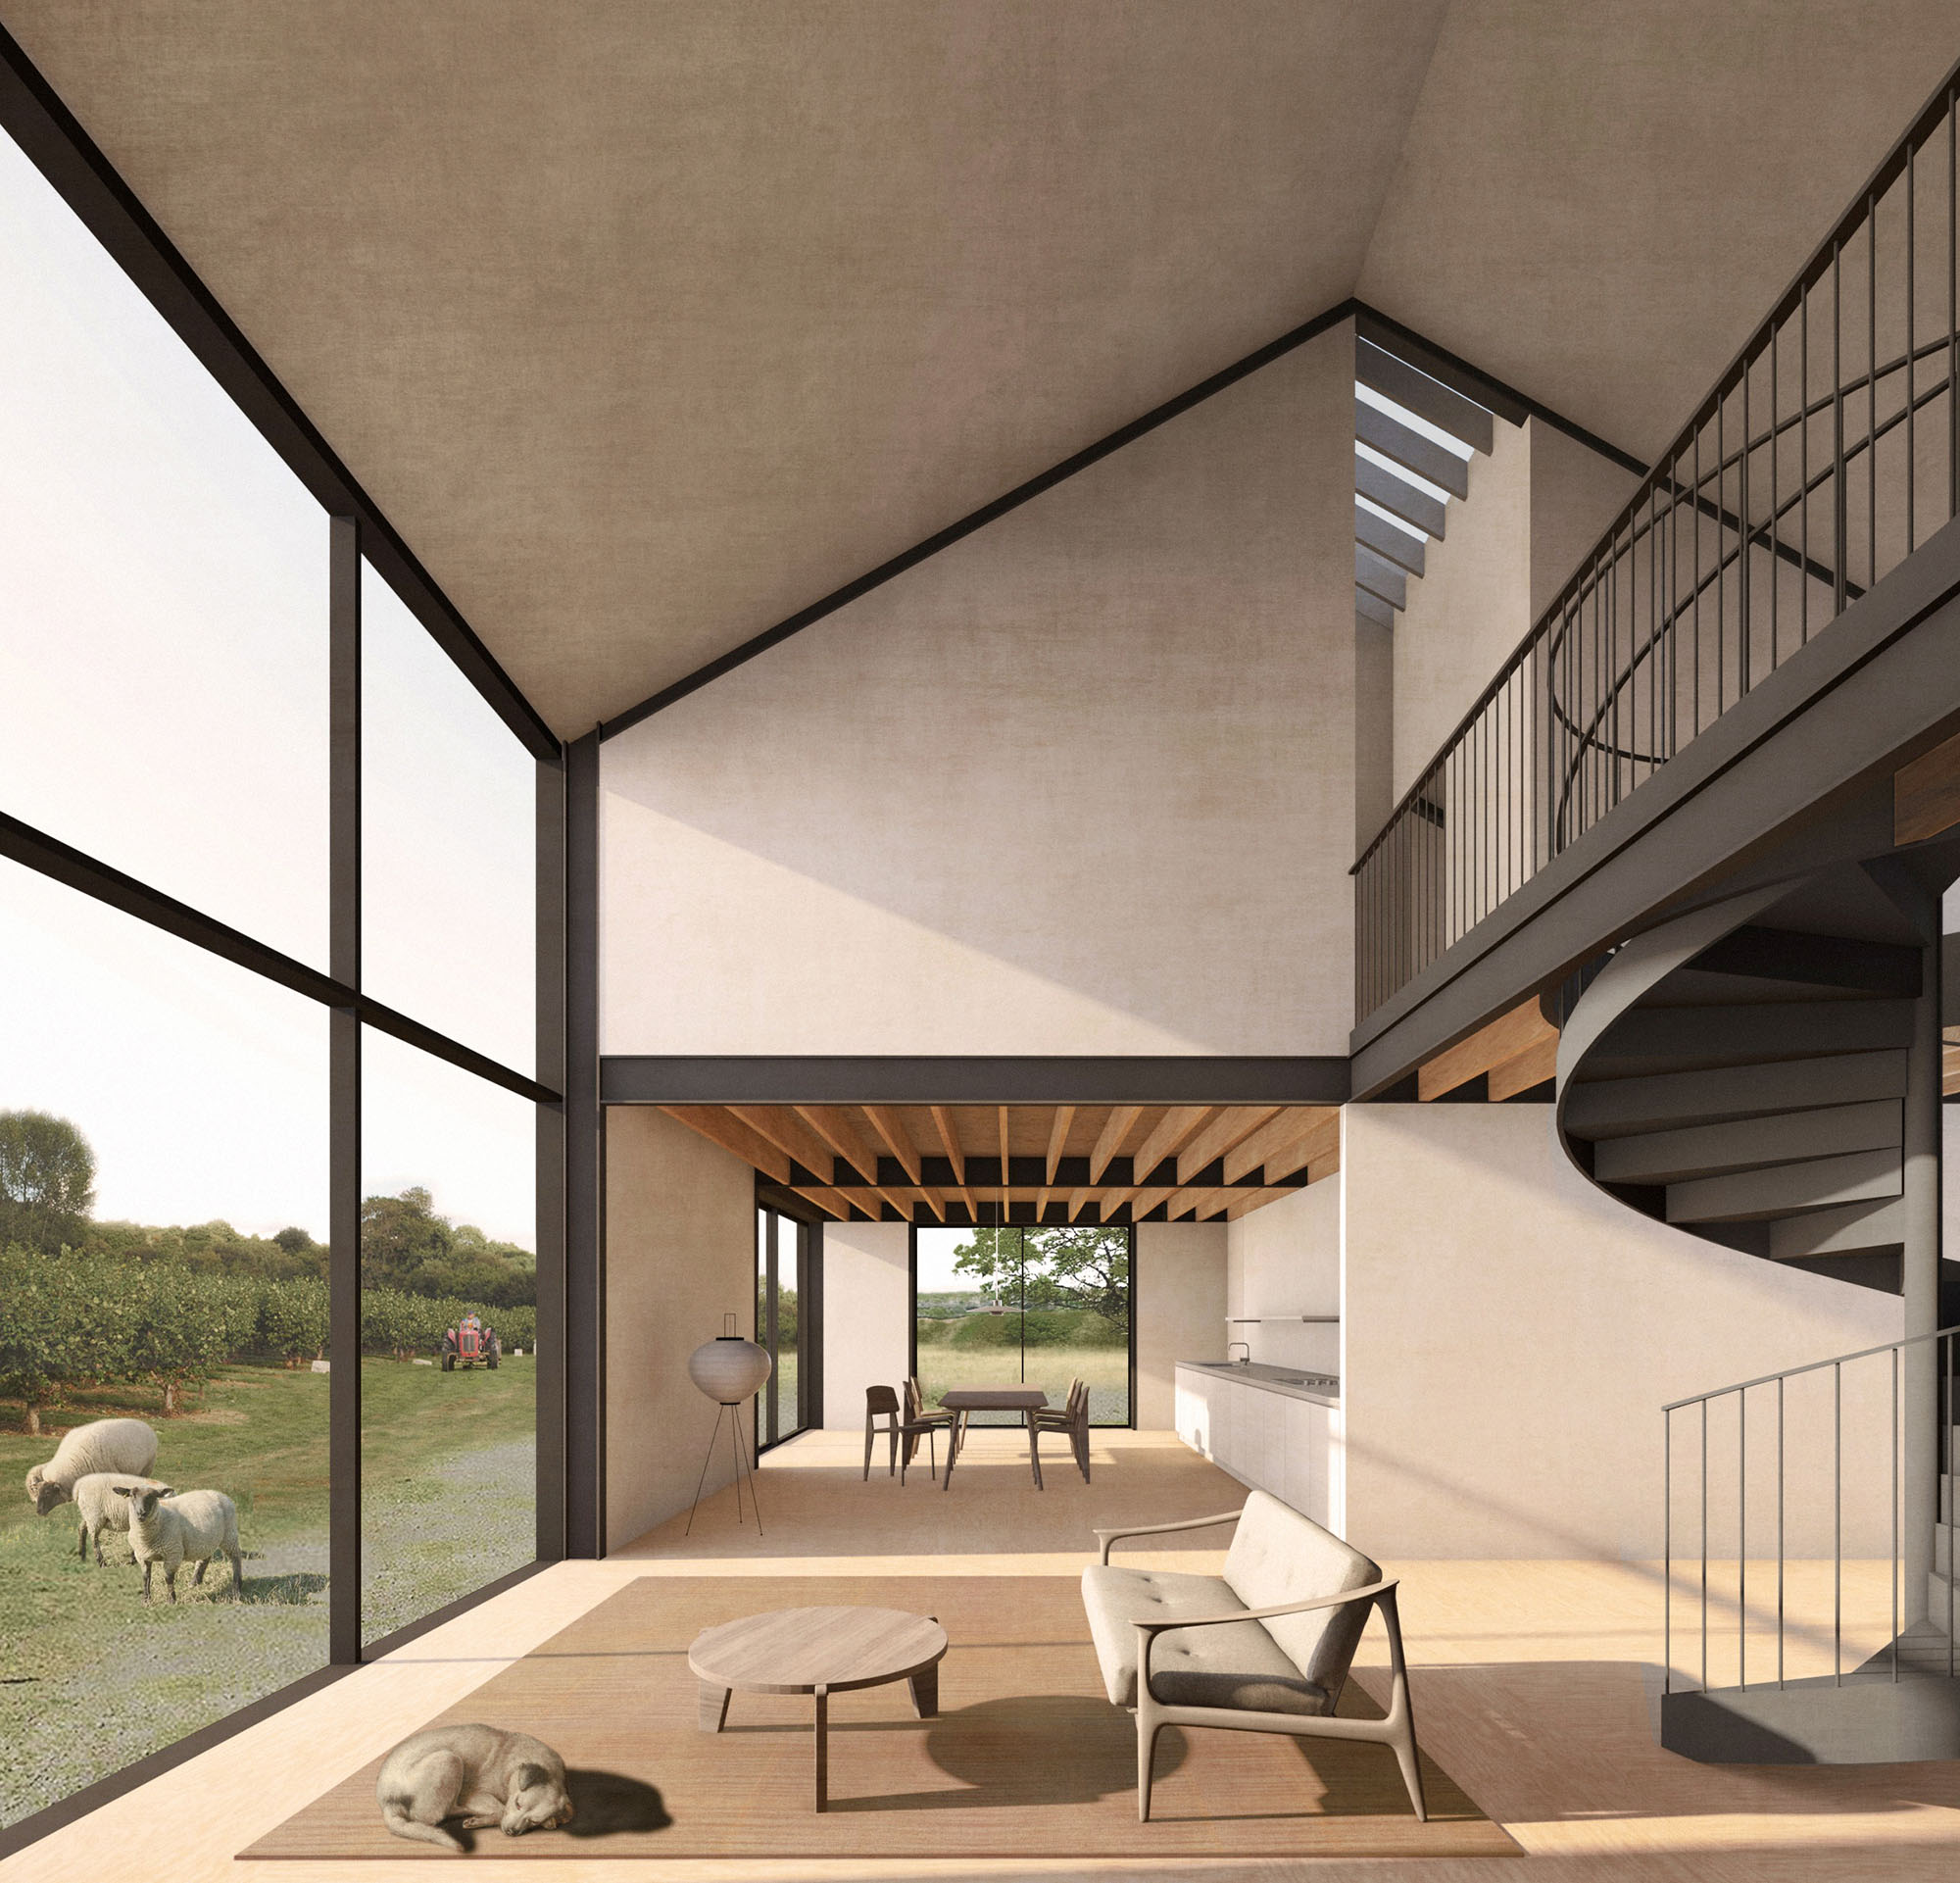 Erbar Mattes Architects Barn to guest house conversion Kent